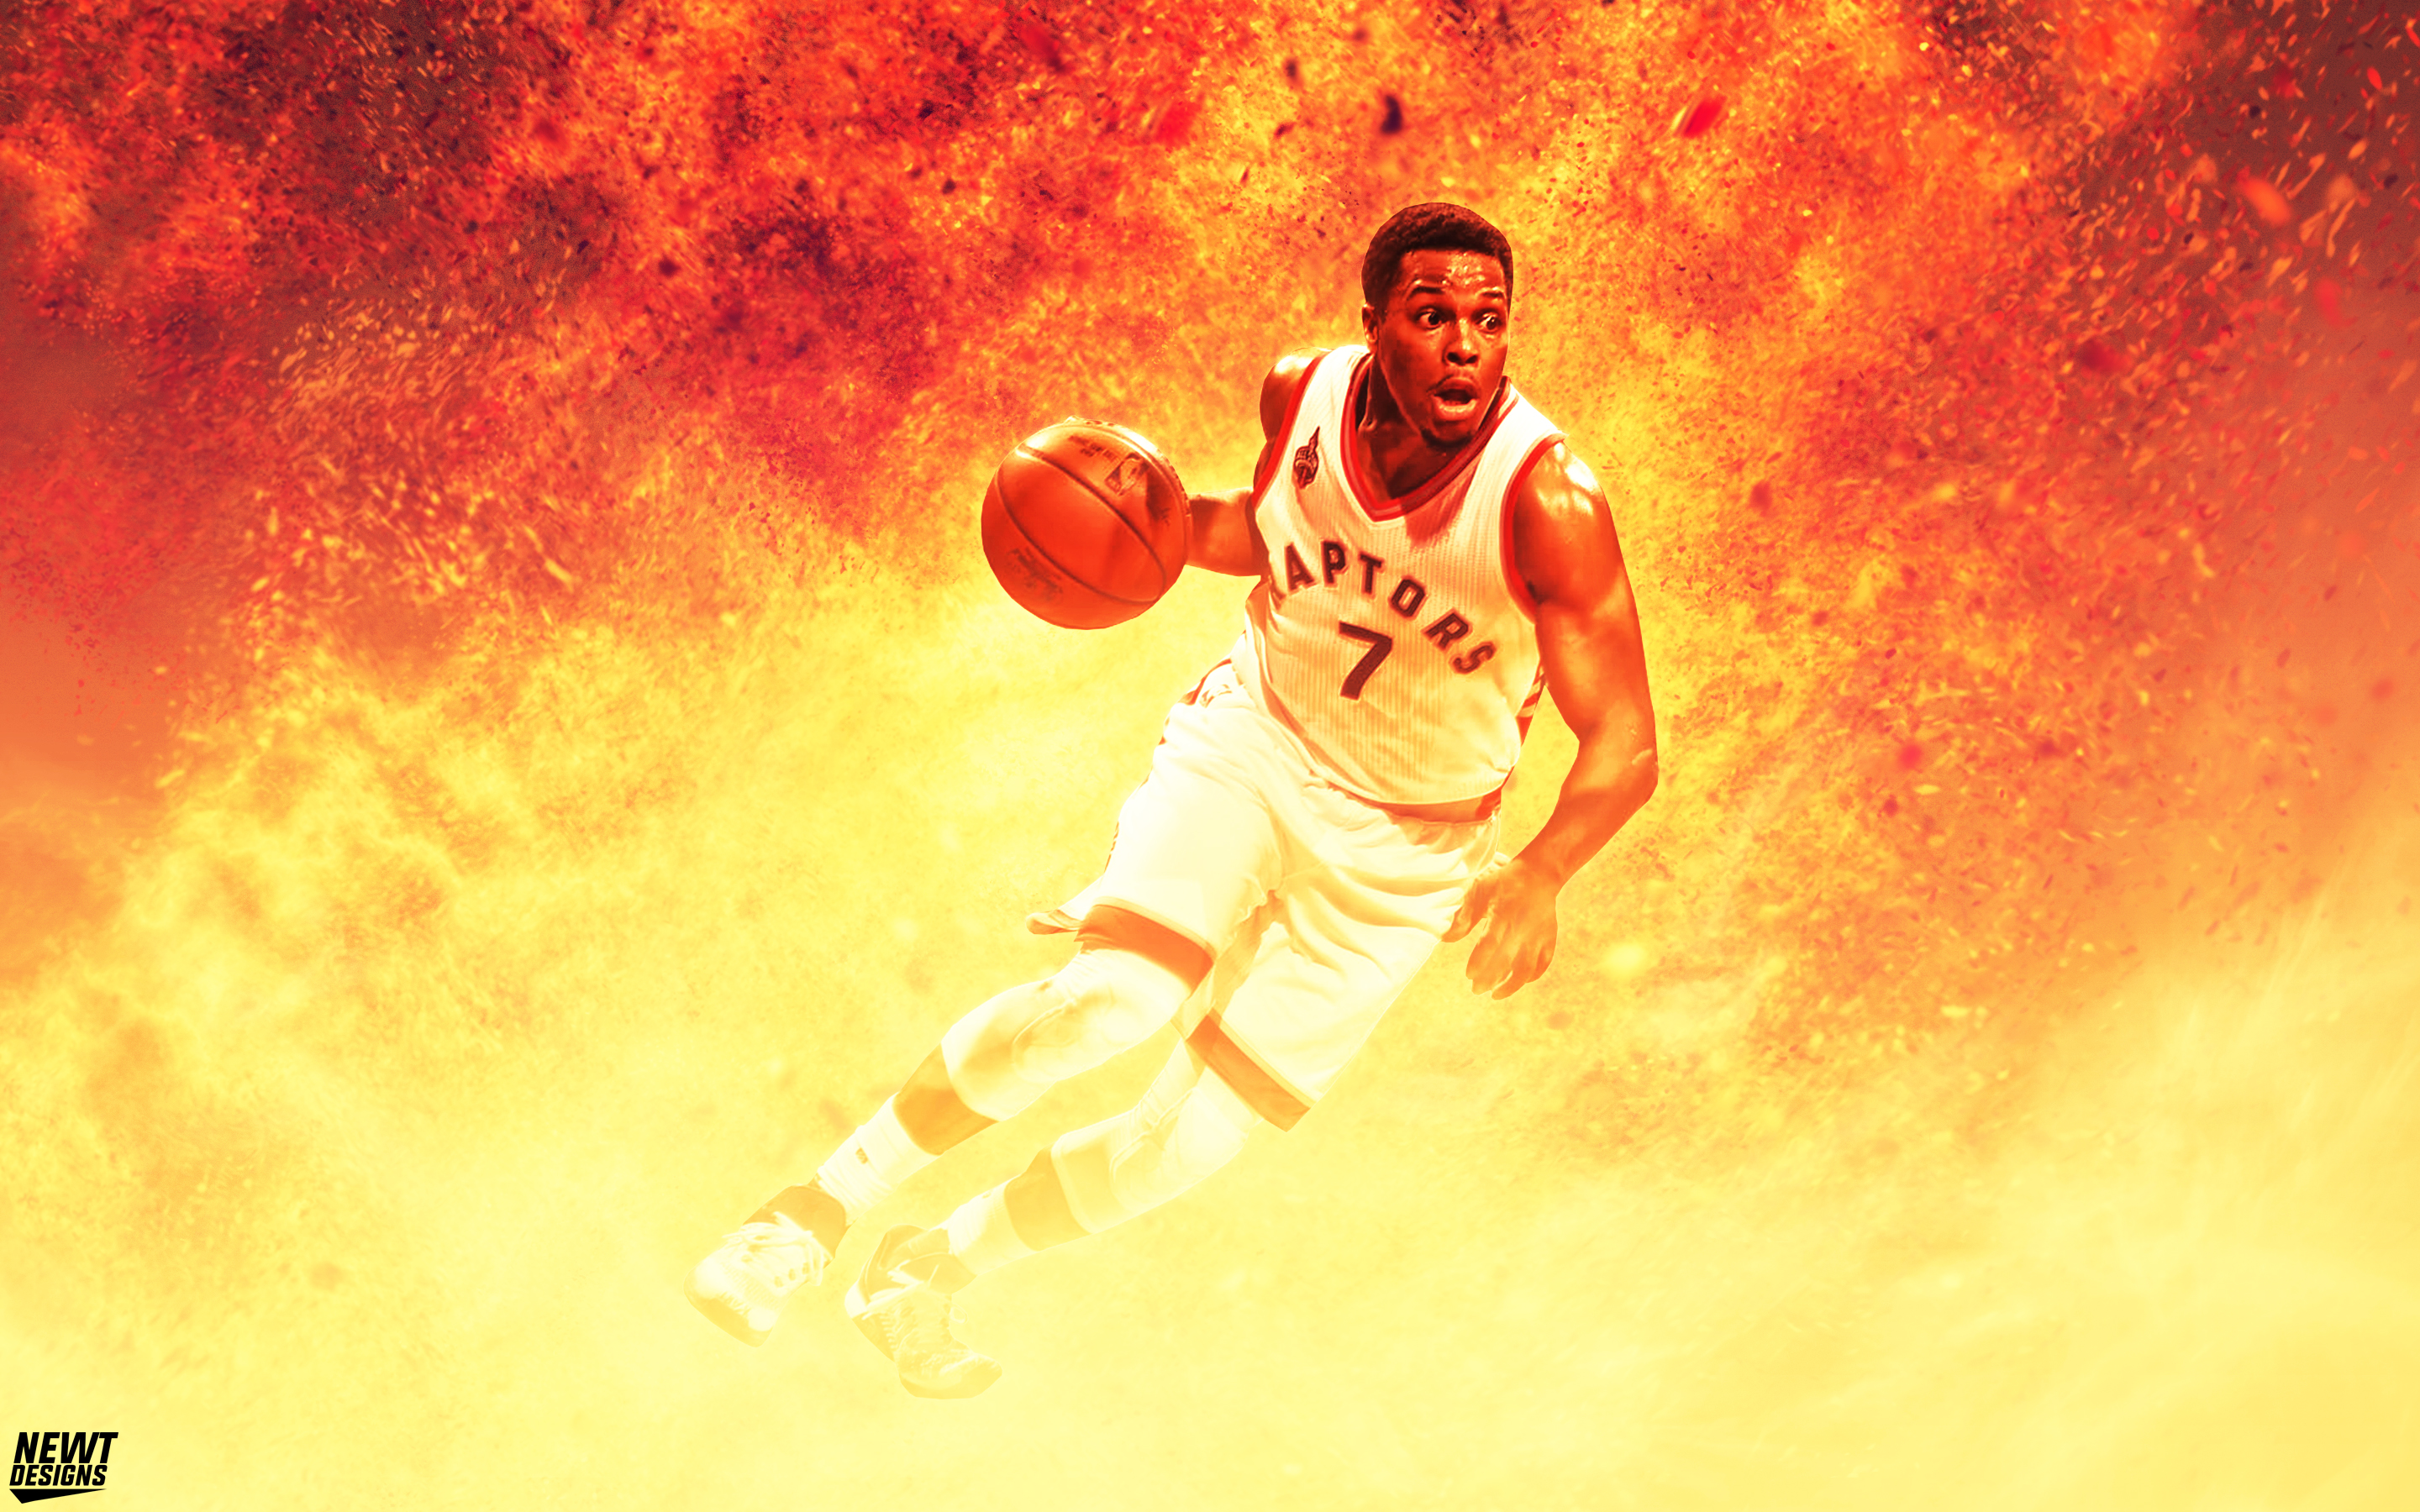 Kyle Lowry images 48 wallpapers   Qularicom 2880x1800